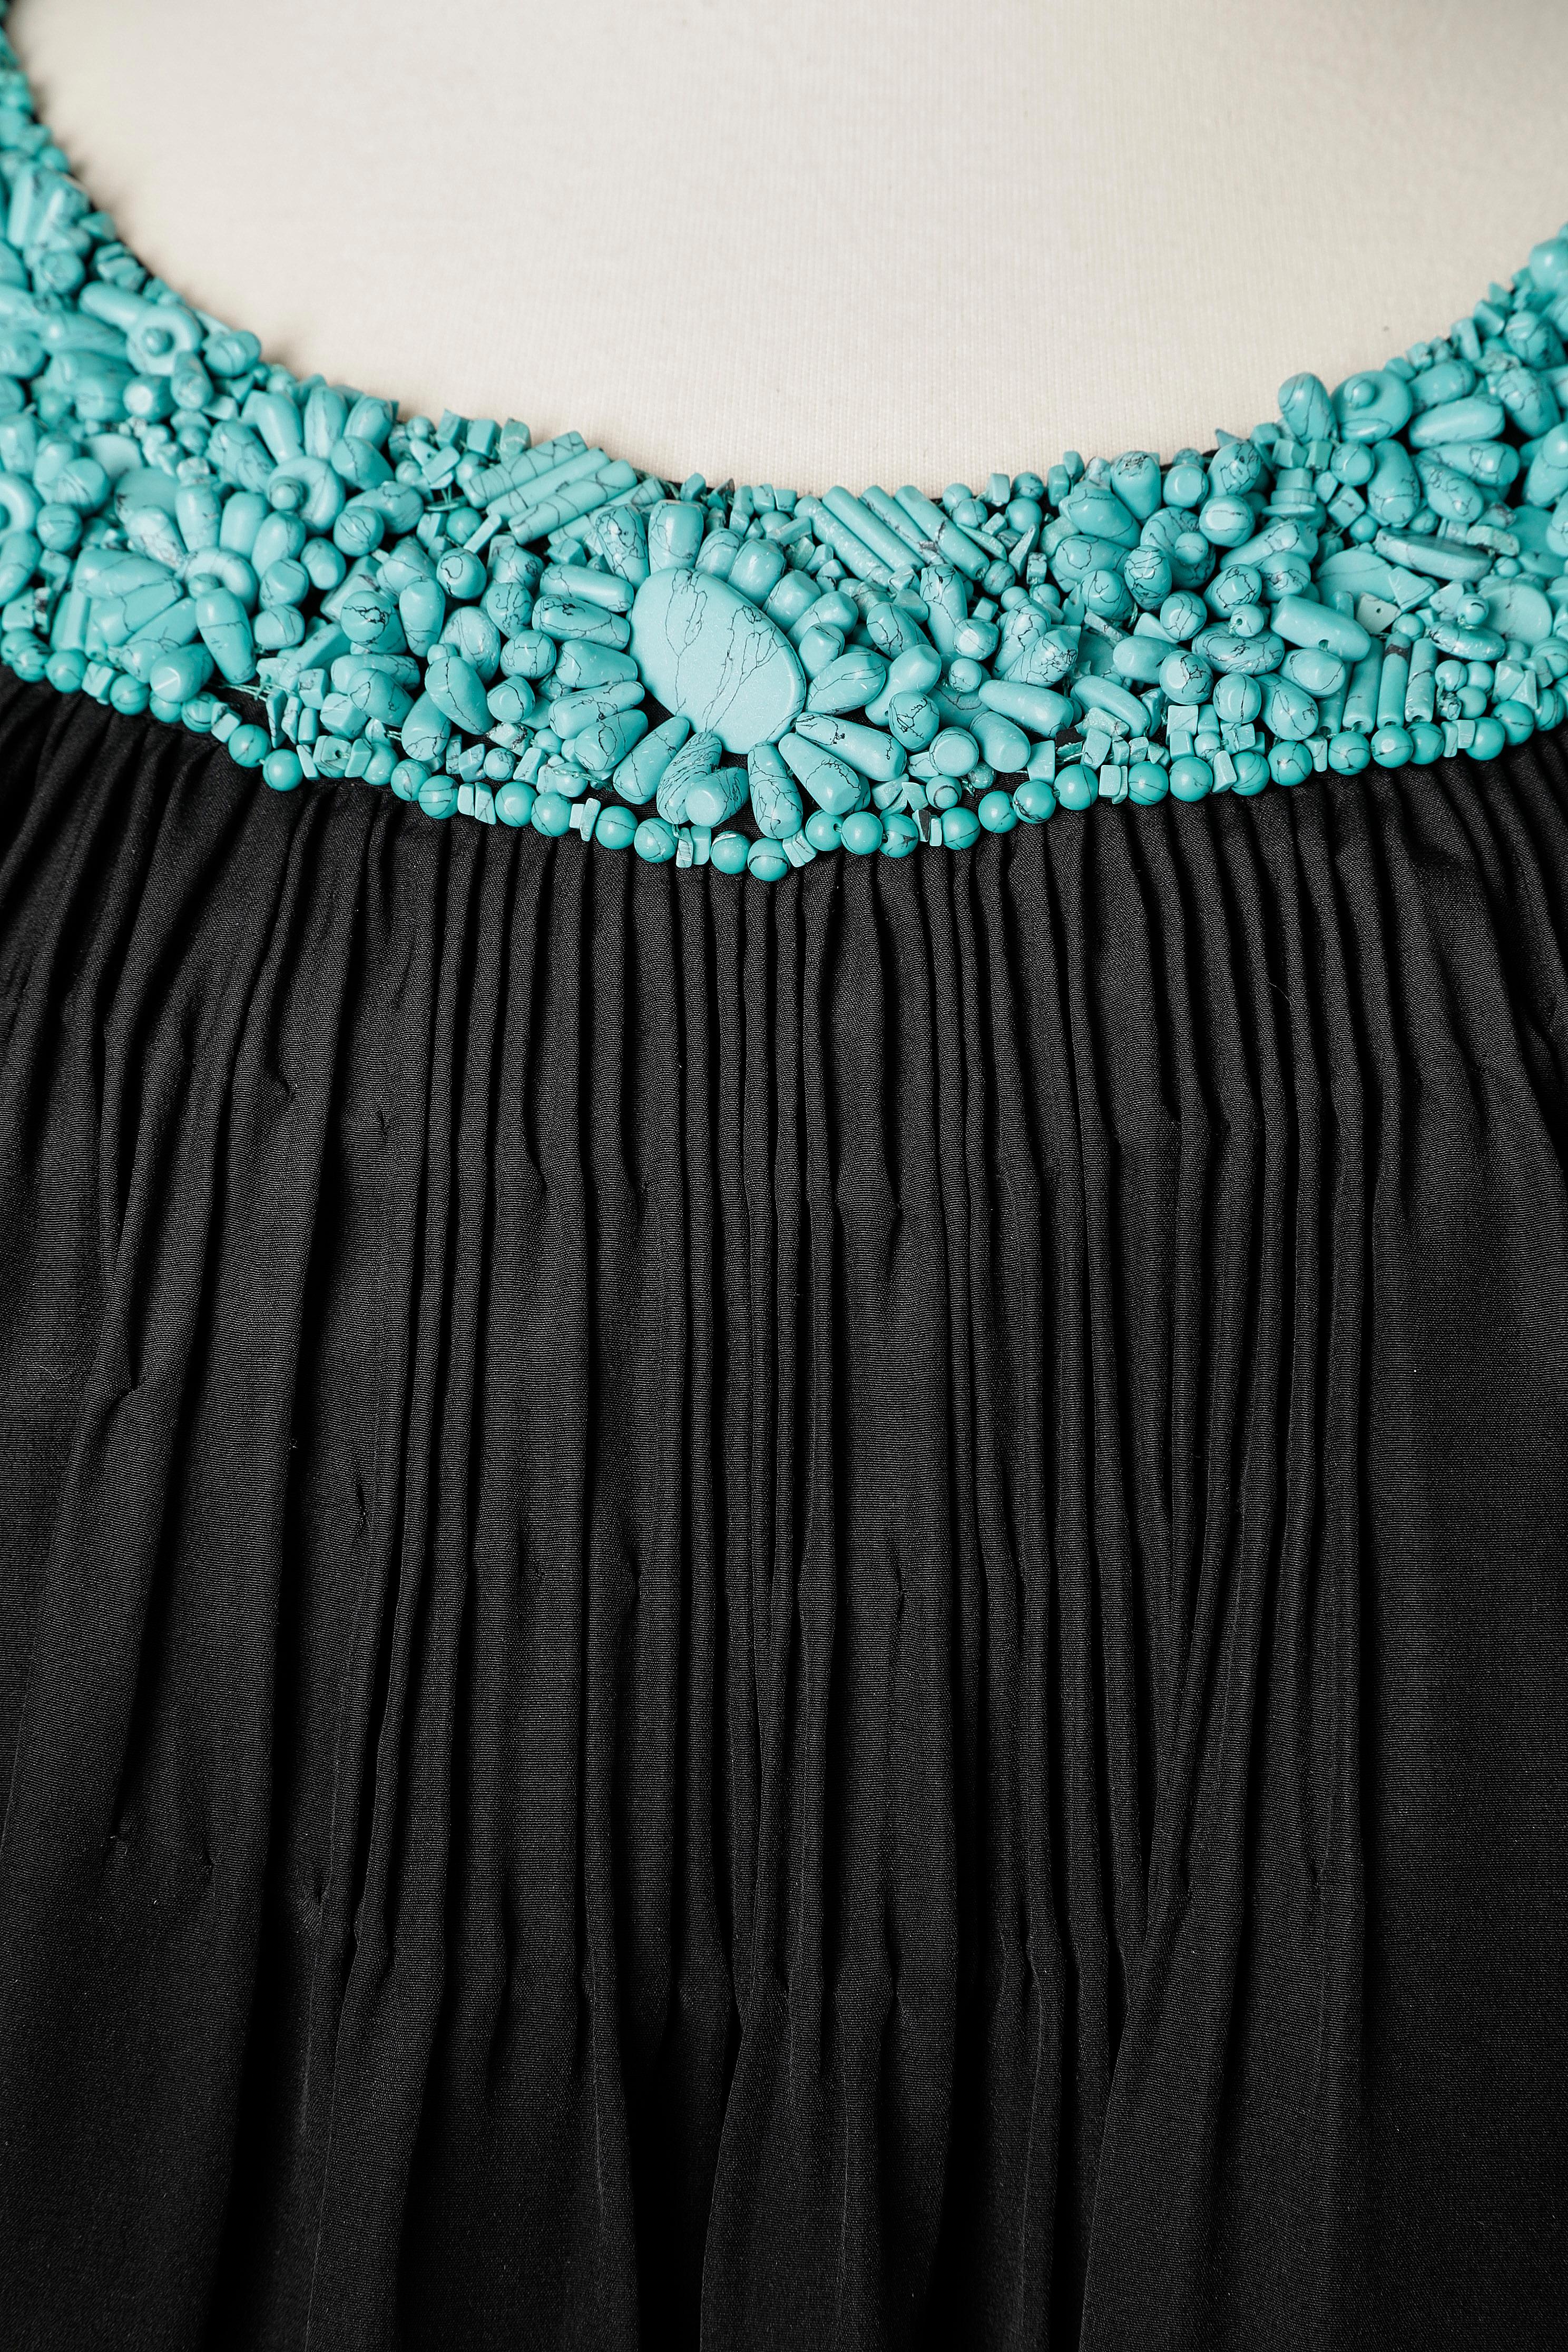 Black cocktail dress with turquoise beaded neckline.
SIZE 8 